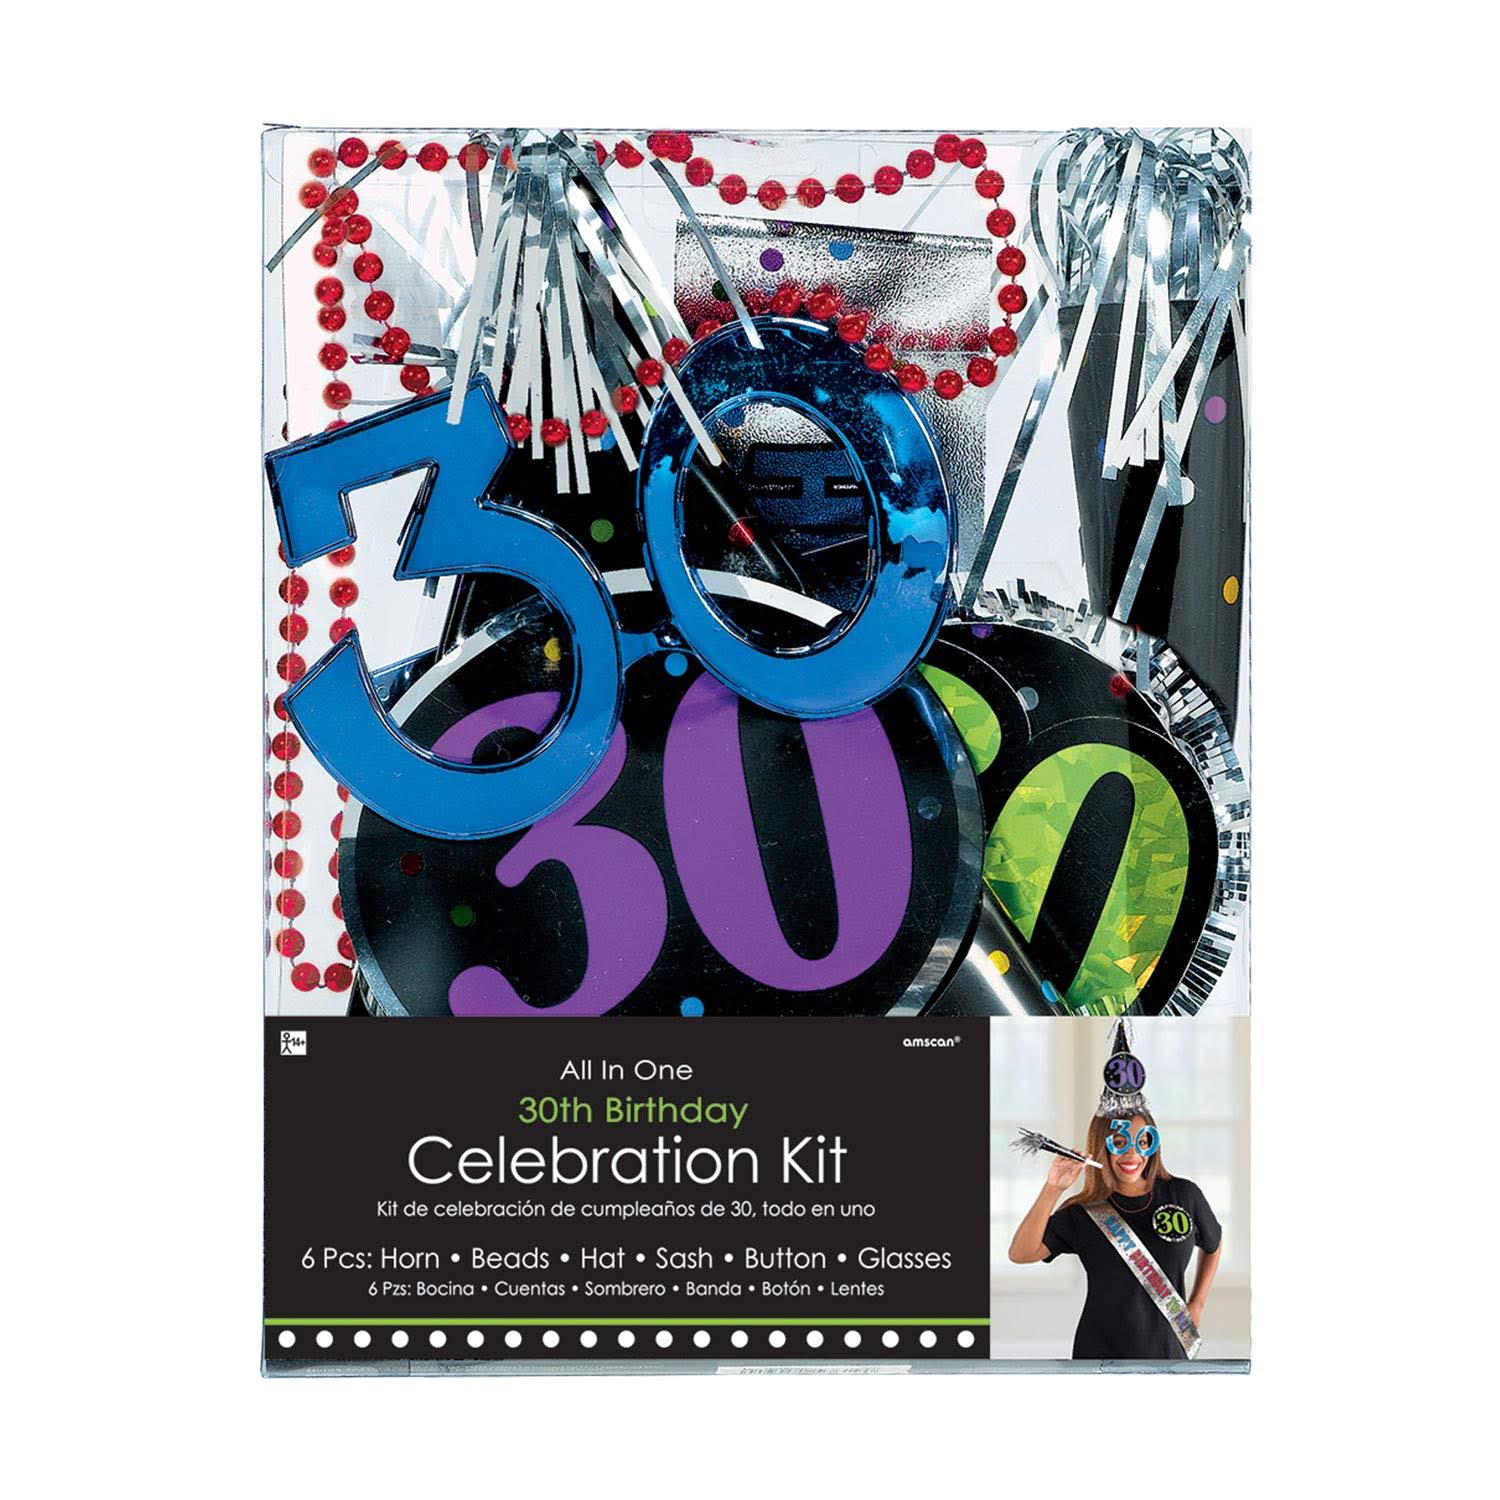 Amscan 920005 30th Birthday Party Celebration Kit - Pack of 6